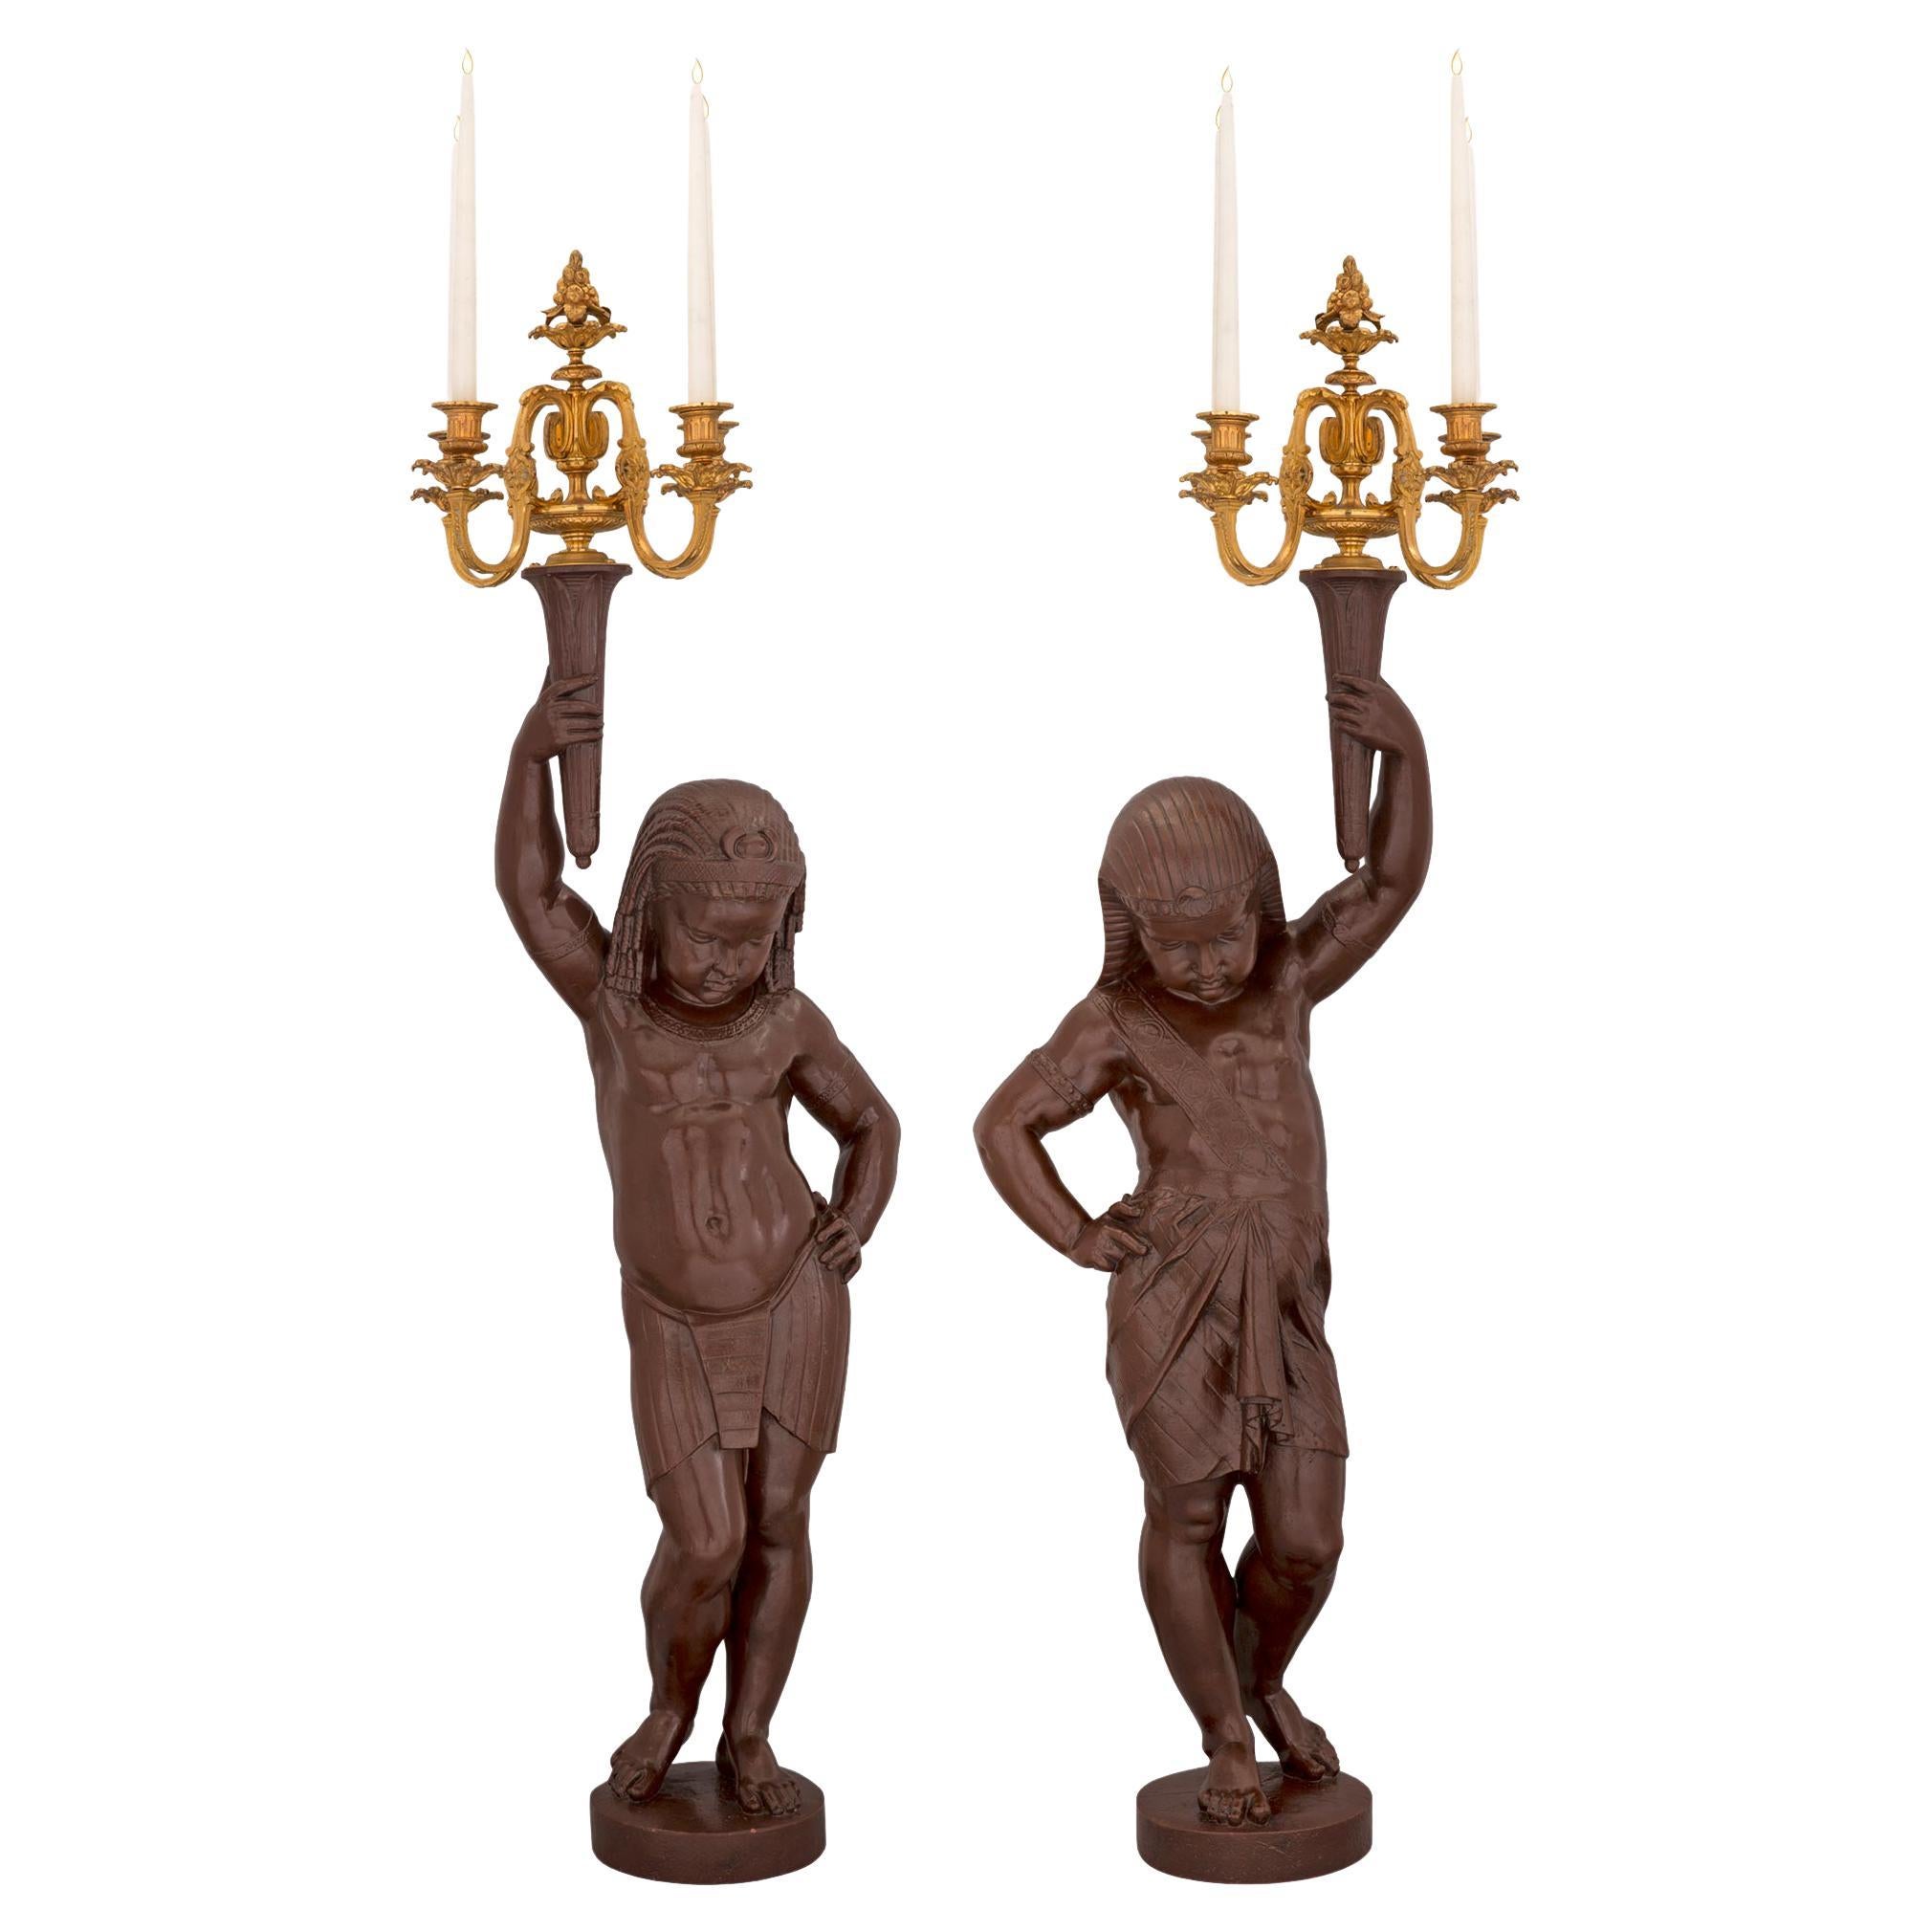 Pair of French Mid-19th Century Patinated Bronze and Ormolu Candelabra Statues For Sale